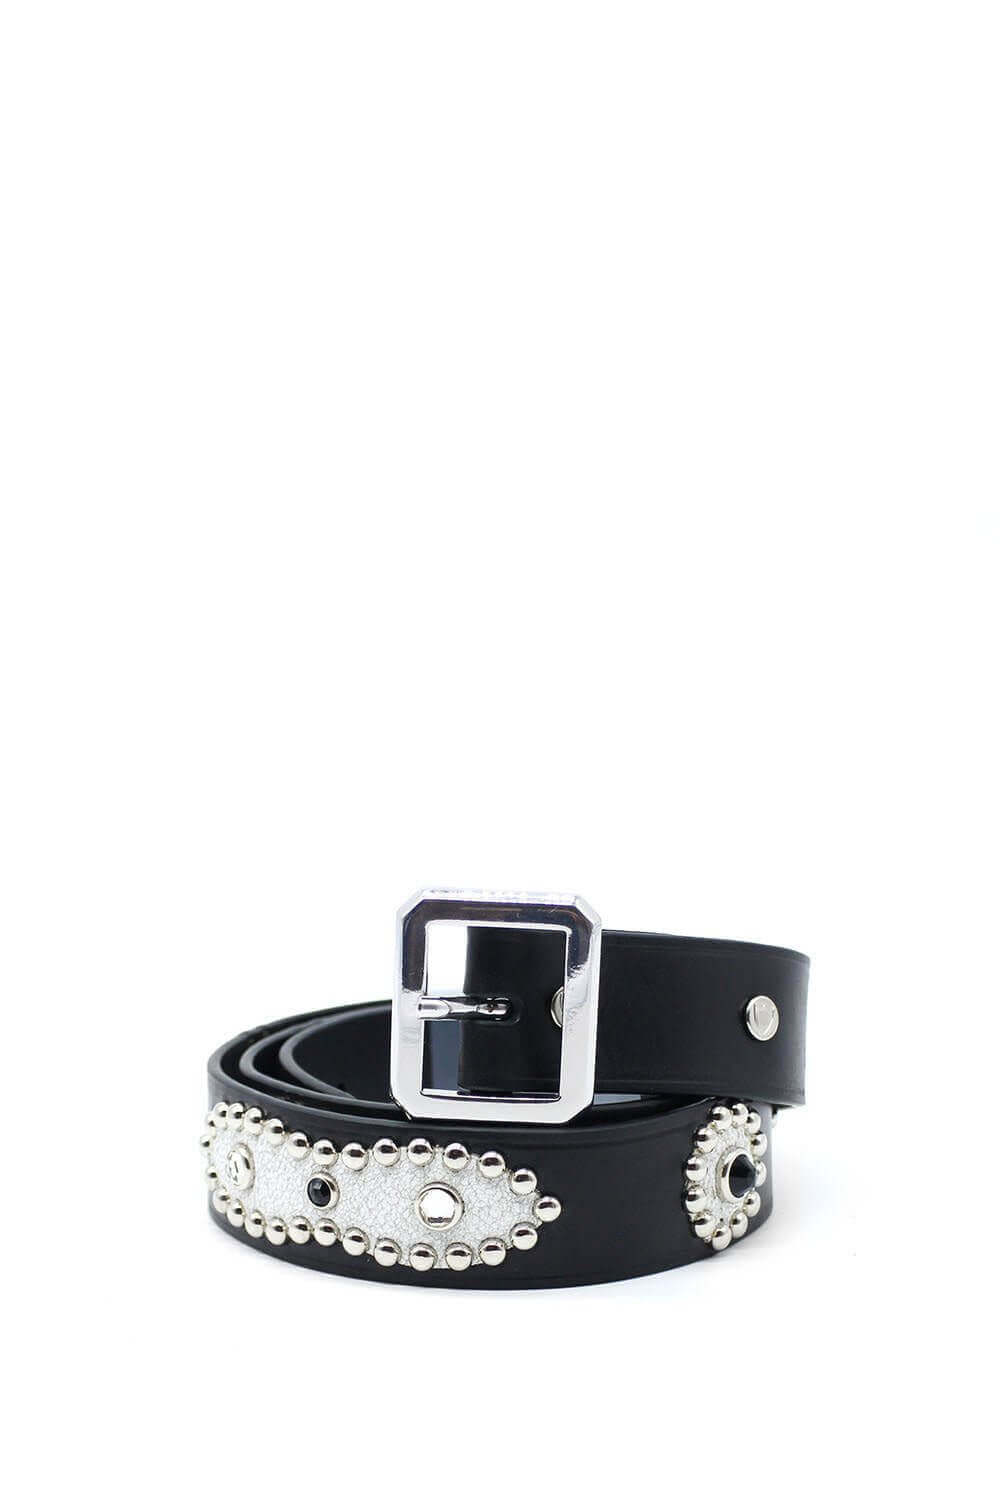 AMERICAN CRACKLE BELT Black leather belt with studs and rhinestones.Height: 3 cm. Made in Italy. HTC LOS ANGELES